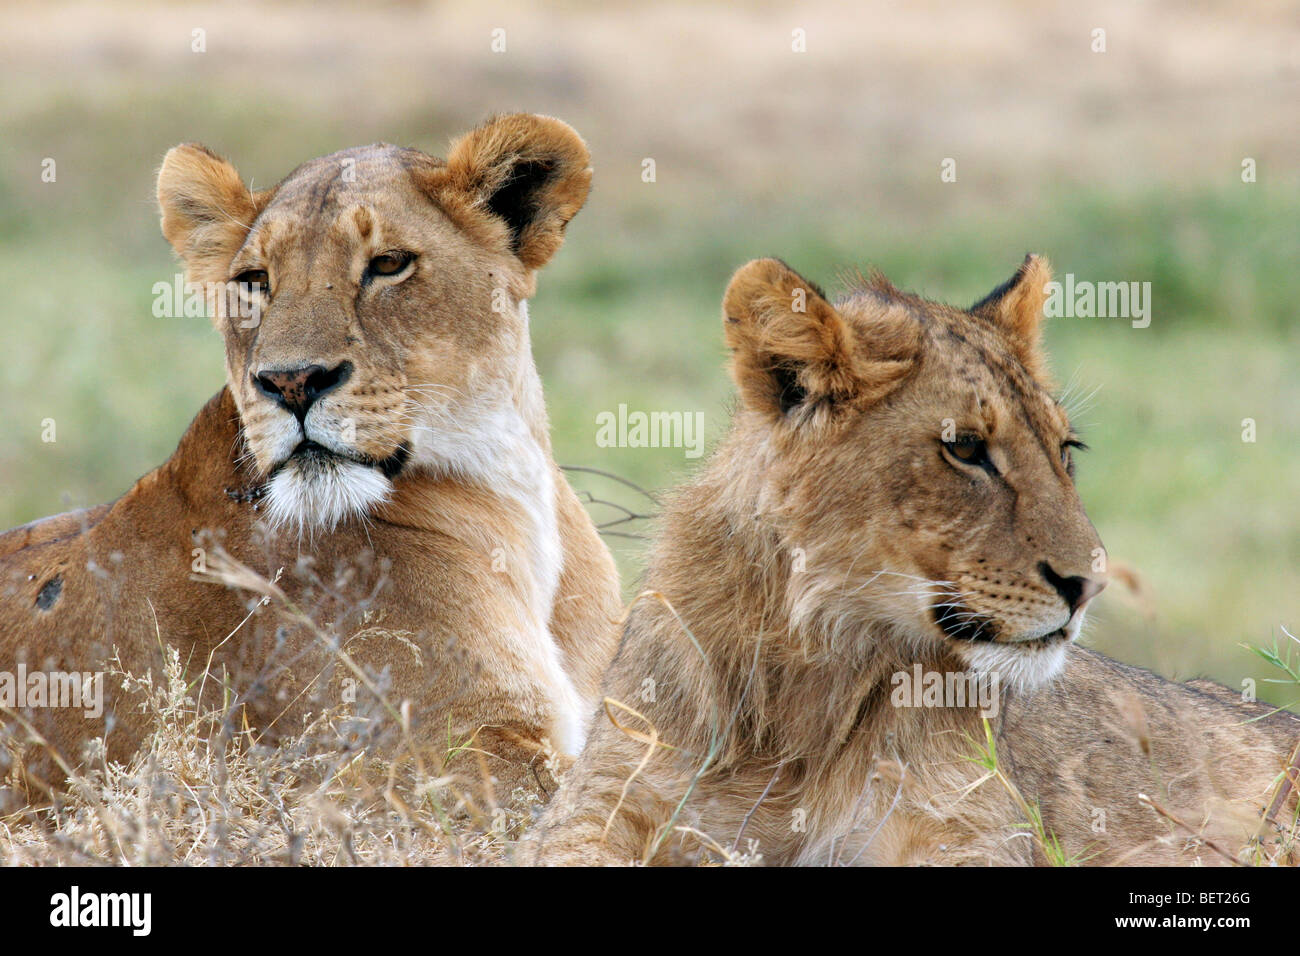 Lioness and young male lion (Panthera leo) resting on the savanna, Ngorongoro crater, Tanzania, East Africa Stock Photo